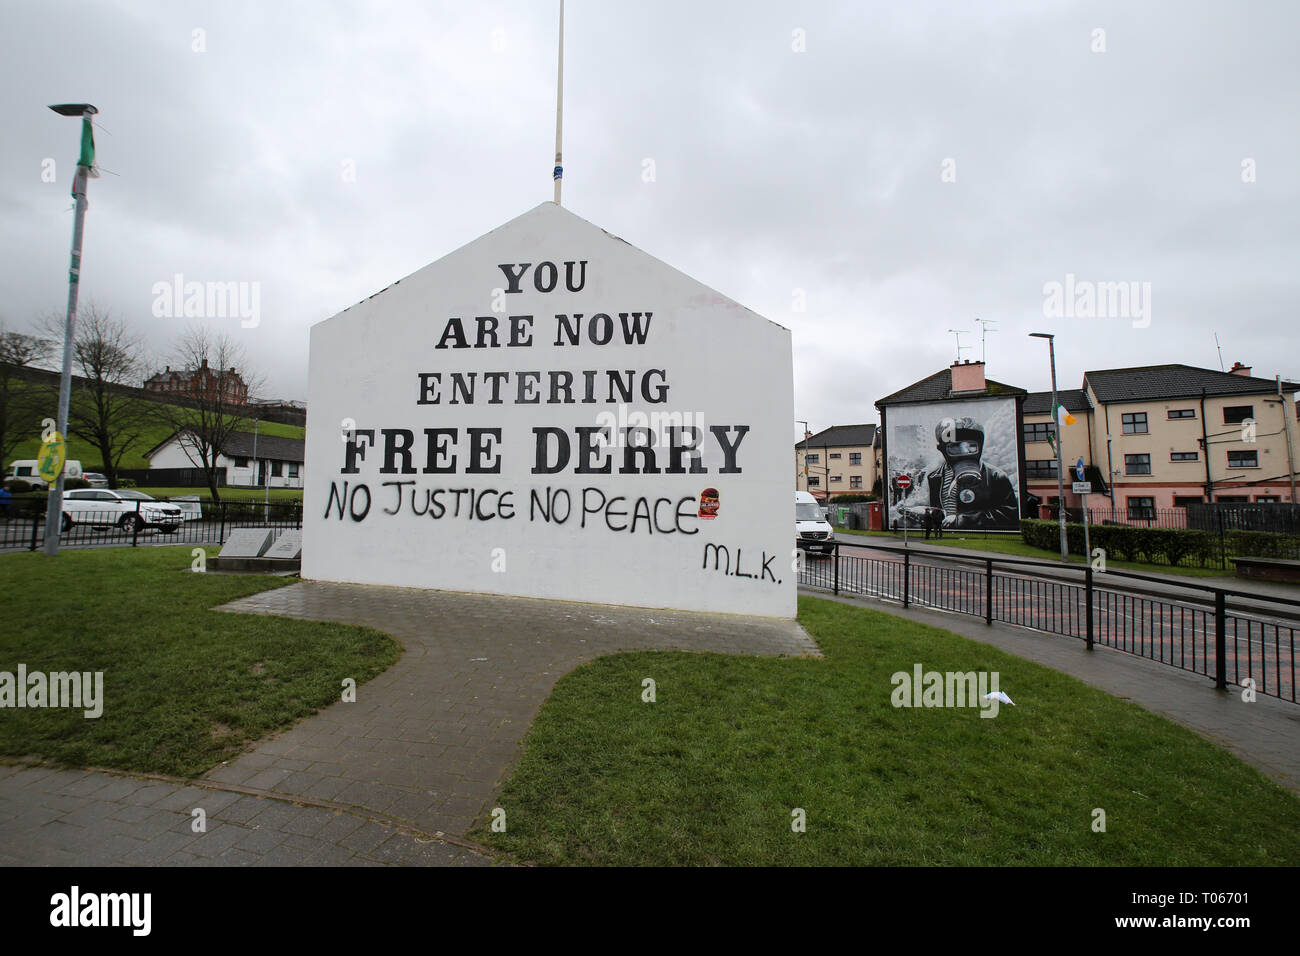 Londonderry, Northern Ireland. 16th Mar 2019. Free Derry Corner with fresh graffti as seen in the nationalist catholic Bogside area of Derry (Londonderry), Northern Ireland, March 16, 2019. - Bloody Sunday, sometimes called the Bogside Massacre, was an incident on 30 January 1972 in the Bogside area of Derry, Northern Ireland, when British soldiers shot 28 unarmed civilians during a protest march against internment. Fourteen people died: thirteen were killed outright, while the death of another man four months later was attributed to his injuries. Credit: Irish Eye/Alamy Live News Stock Photo